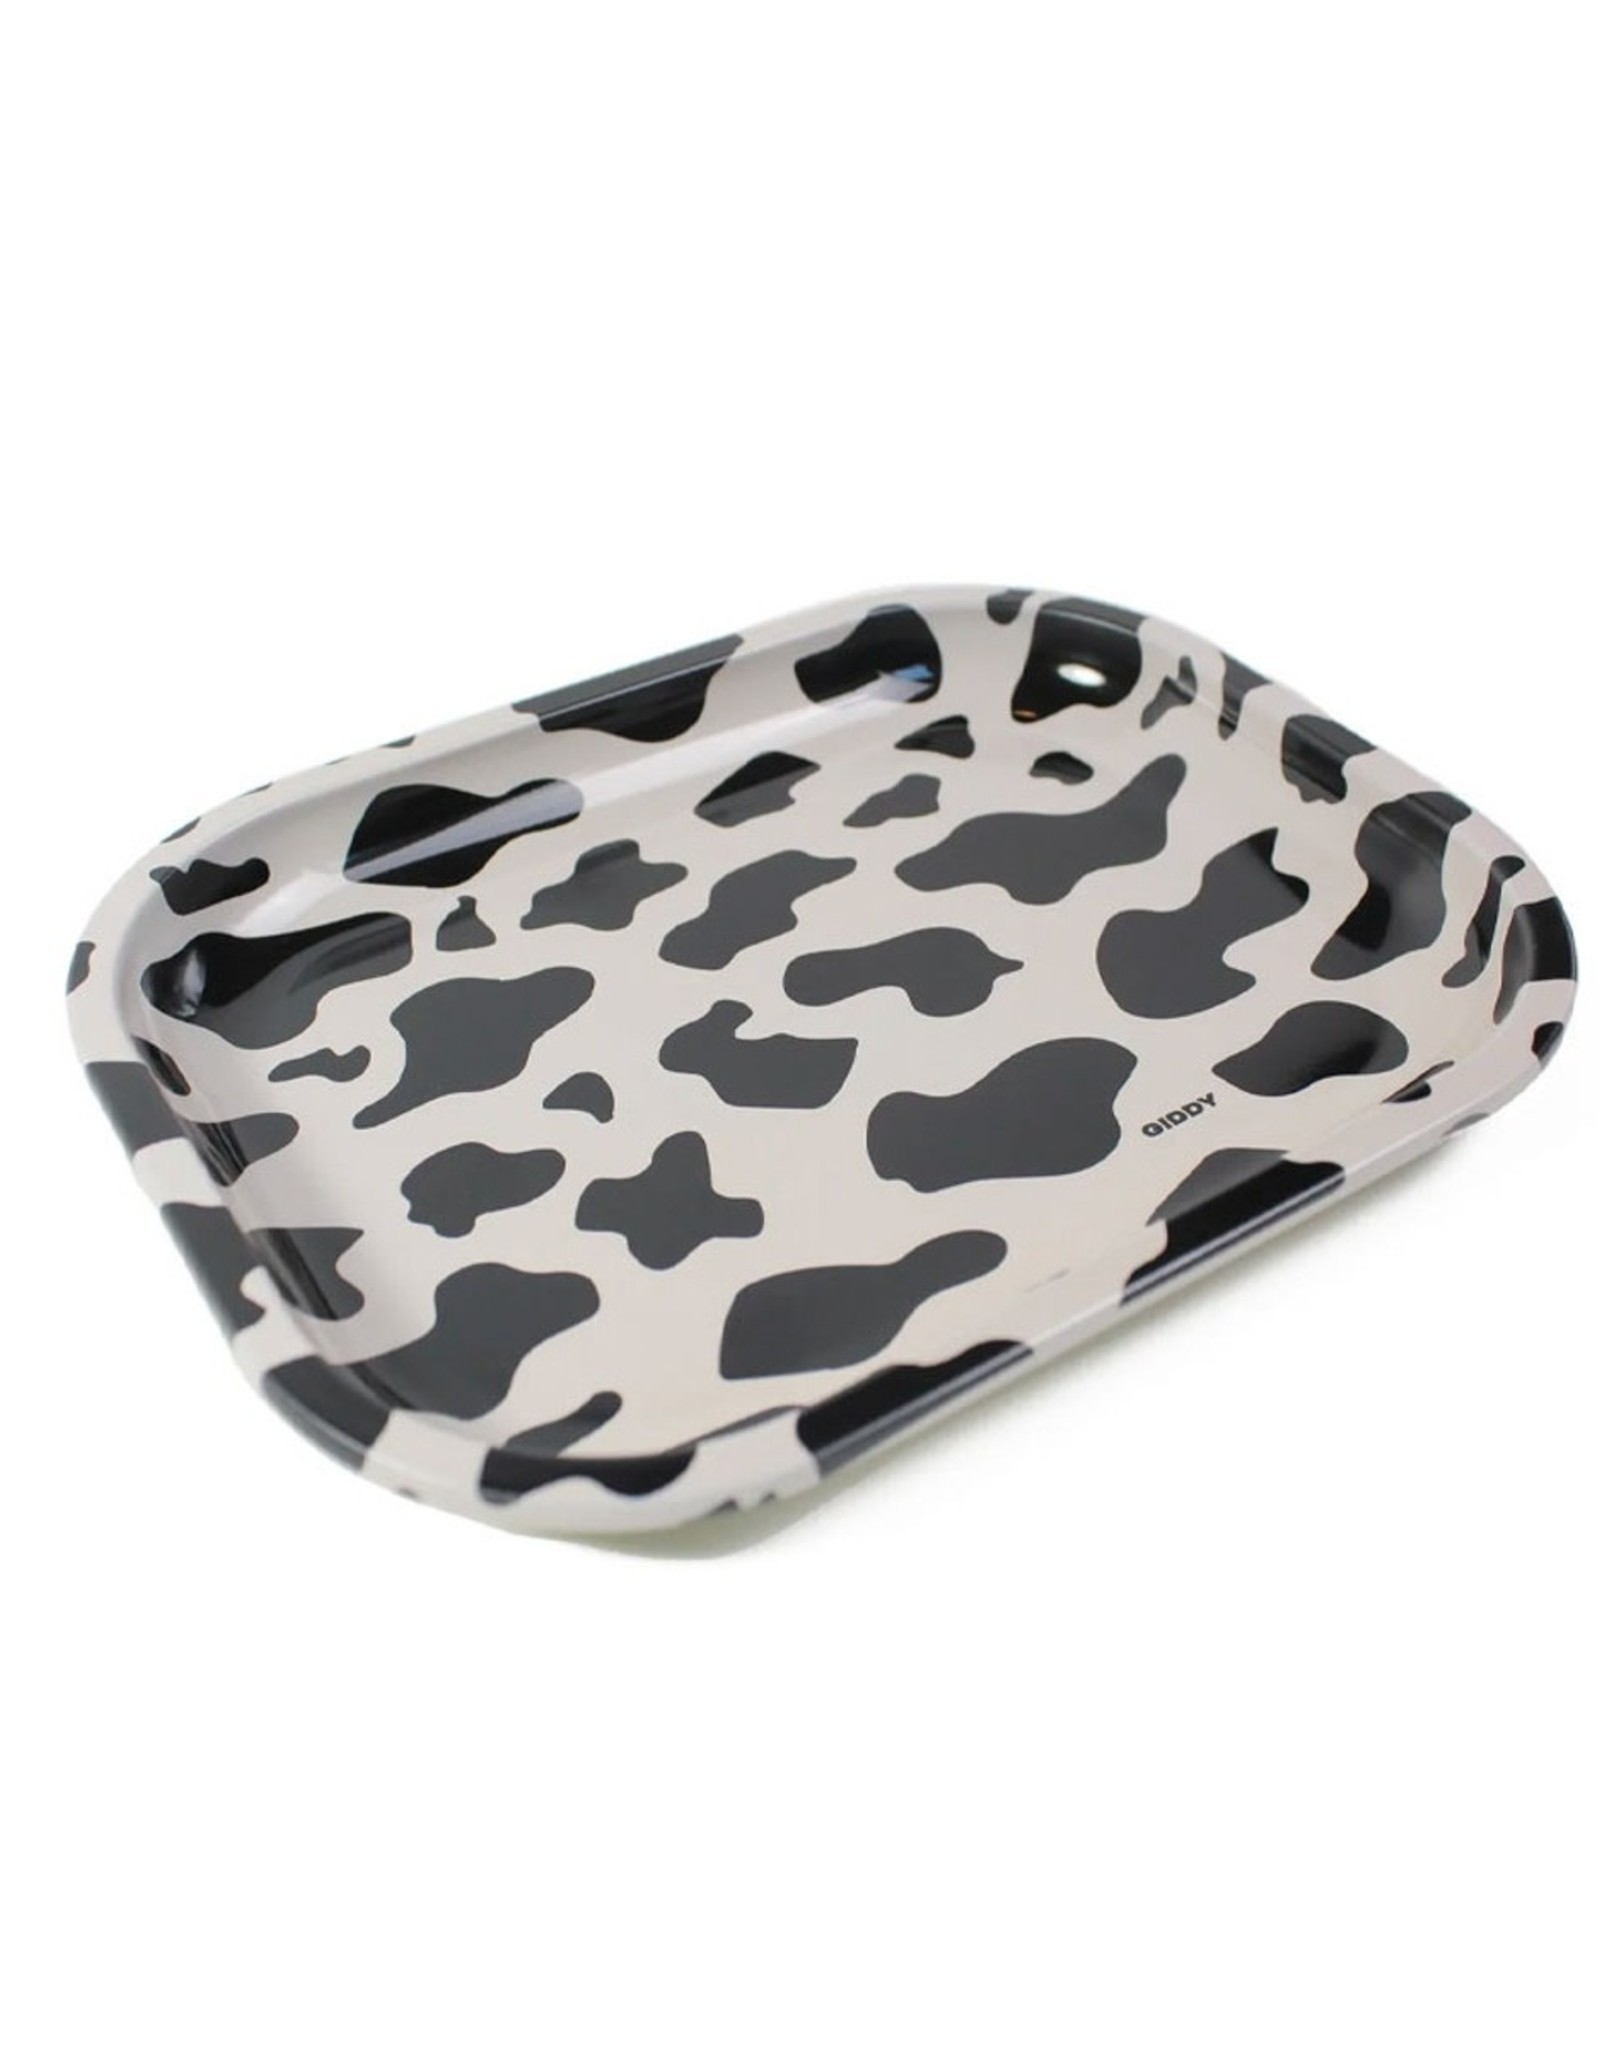 Giddy Cow Print Small Rolling Tray - 7.2" x 5.6"